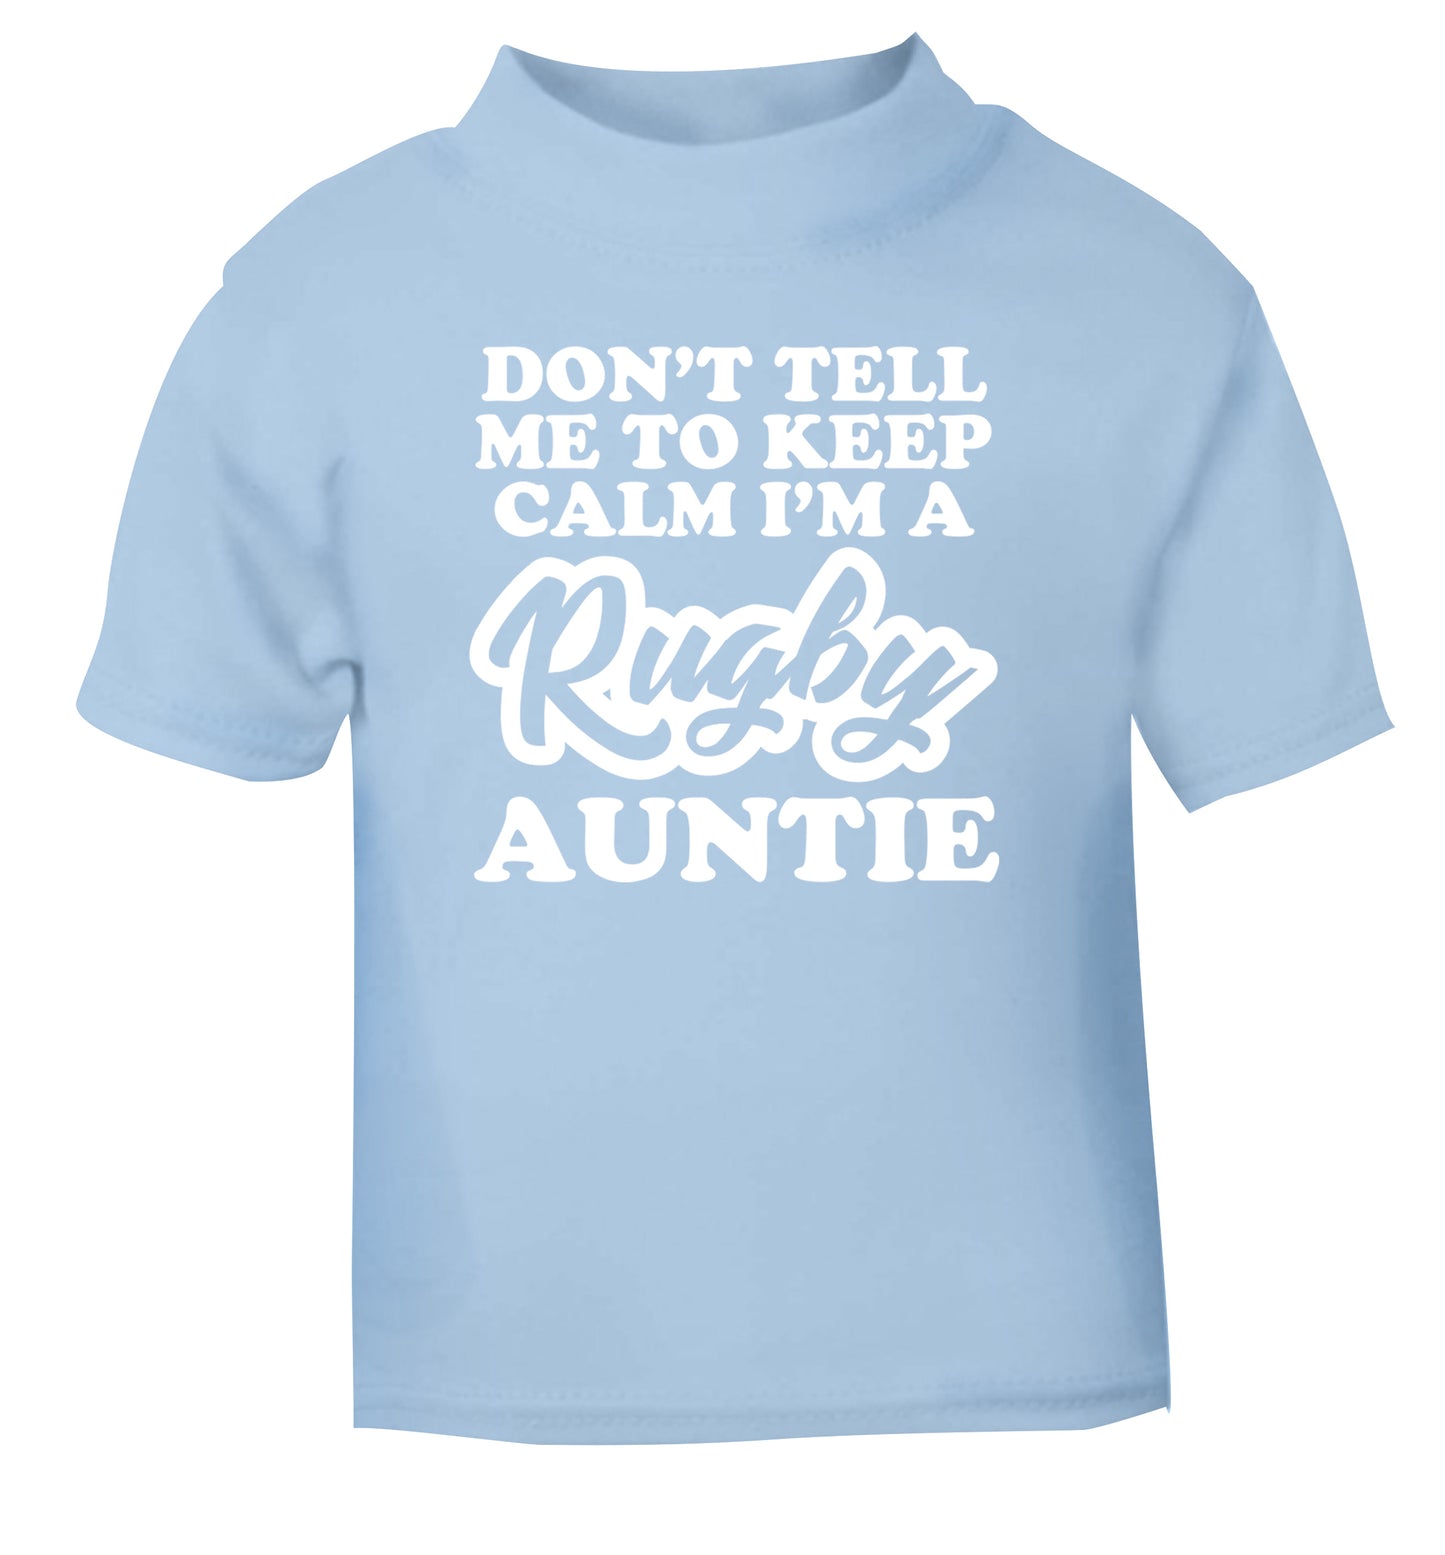 Don't tell me keep calm I'm a rugby auntie light blue Baby Toddler Tshirt 2 Years